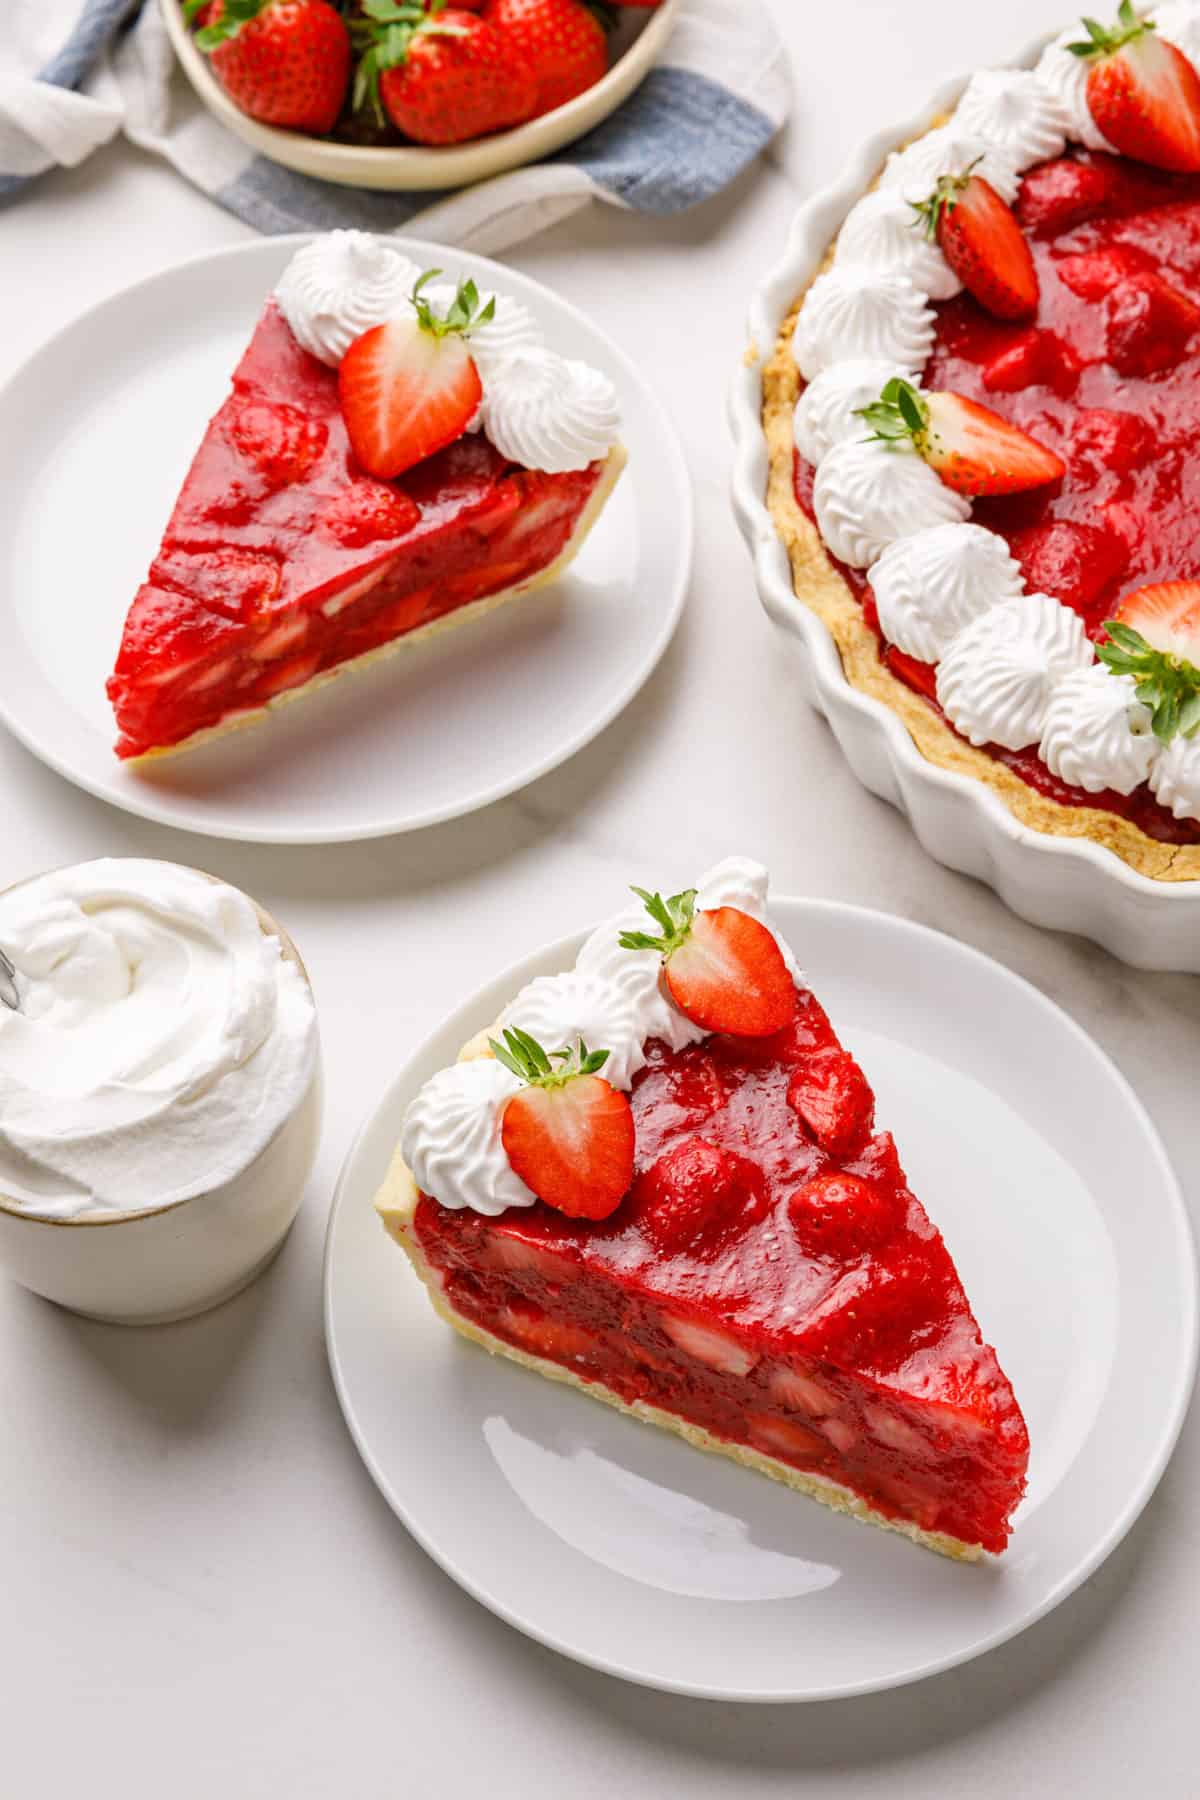 slice of classic strawberry pie with chantilly cream served on a white round plate